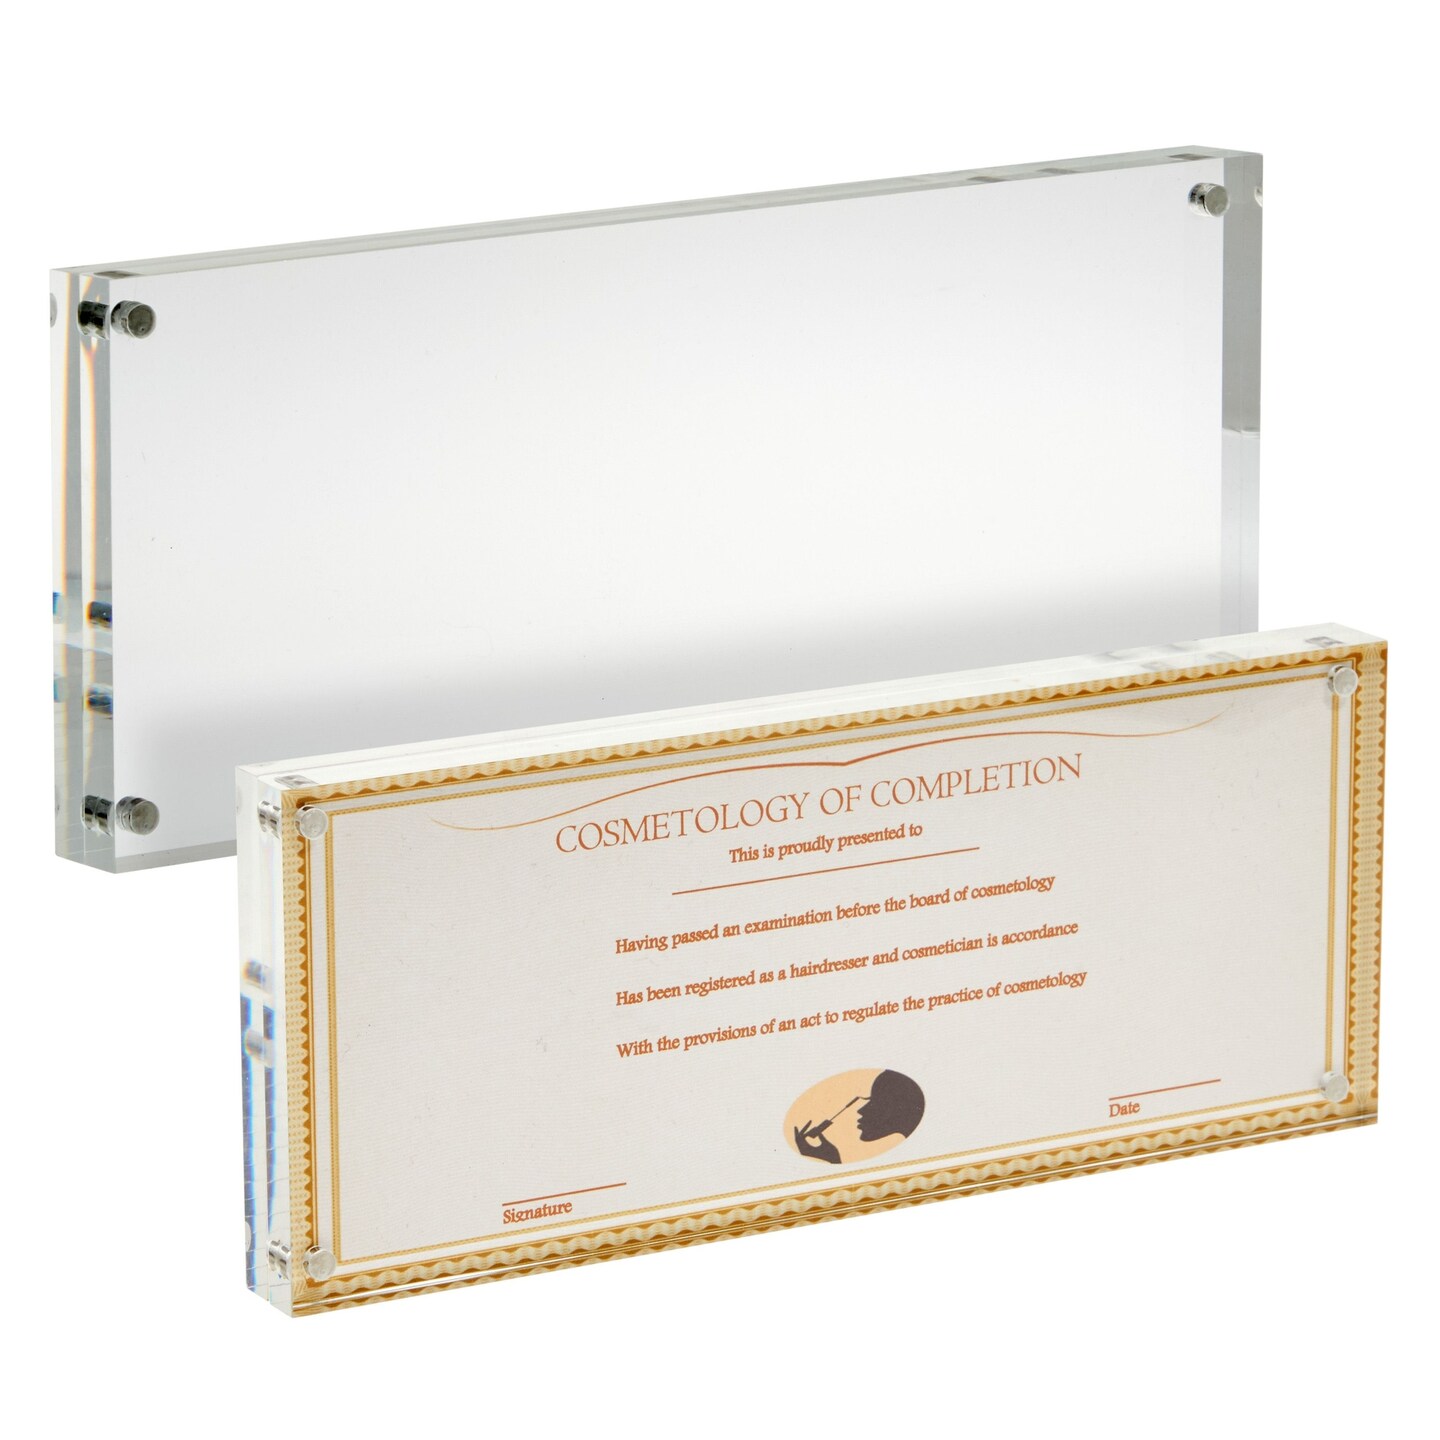 4x10 Acrylic Professional License Frame for Office and Business, Table Top Certificate Display